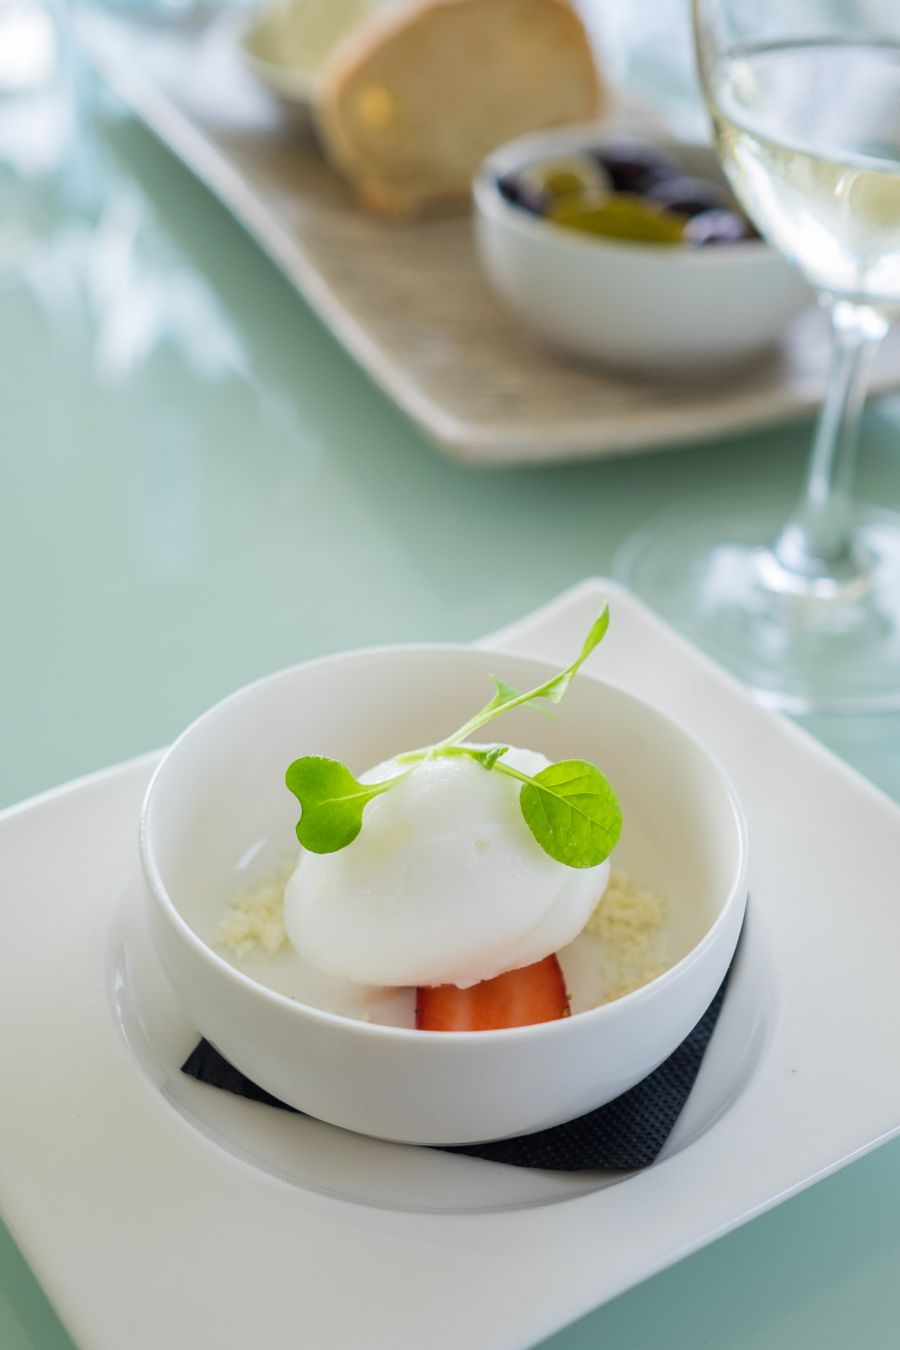 Palate cleanser: lemon sorbet with citrus sherbet and fresh strawberries